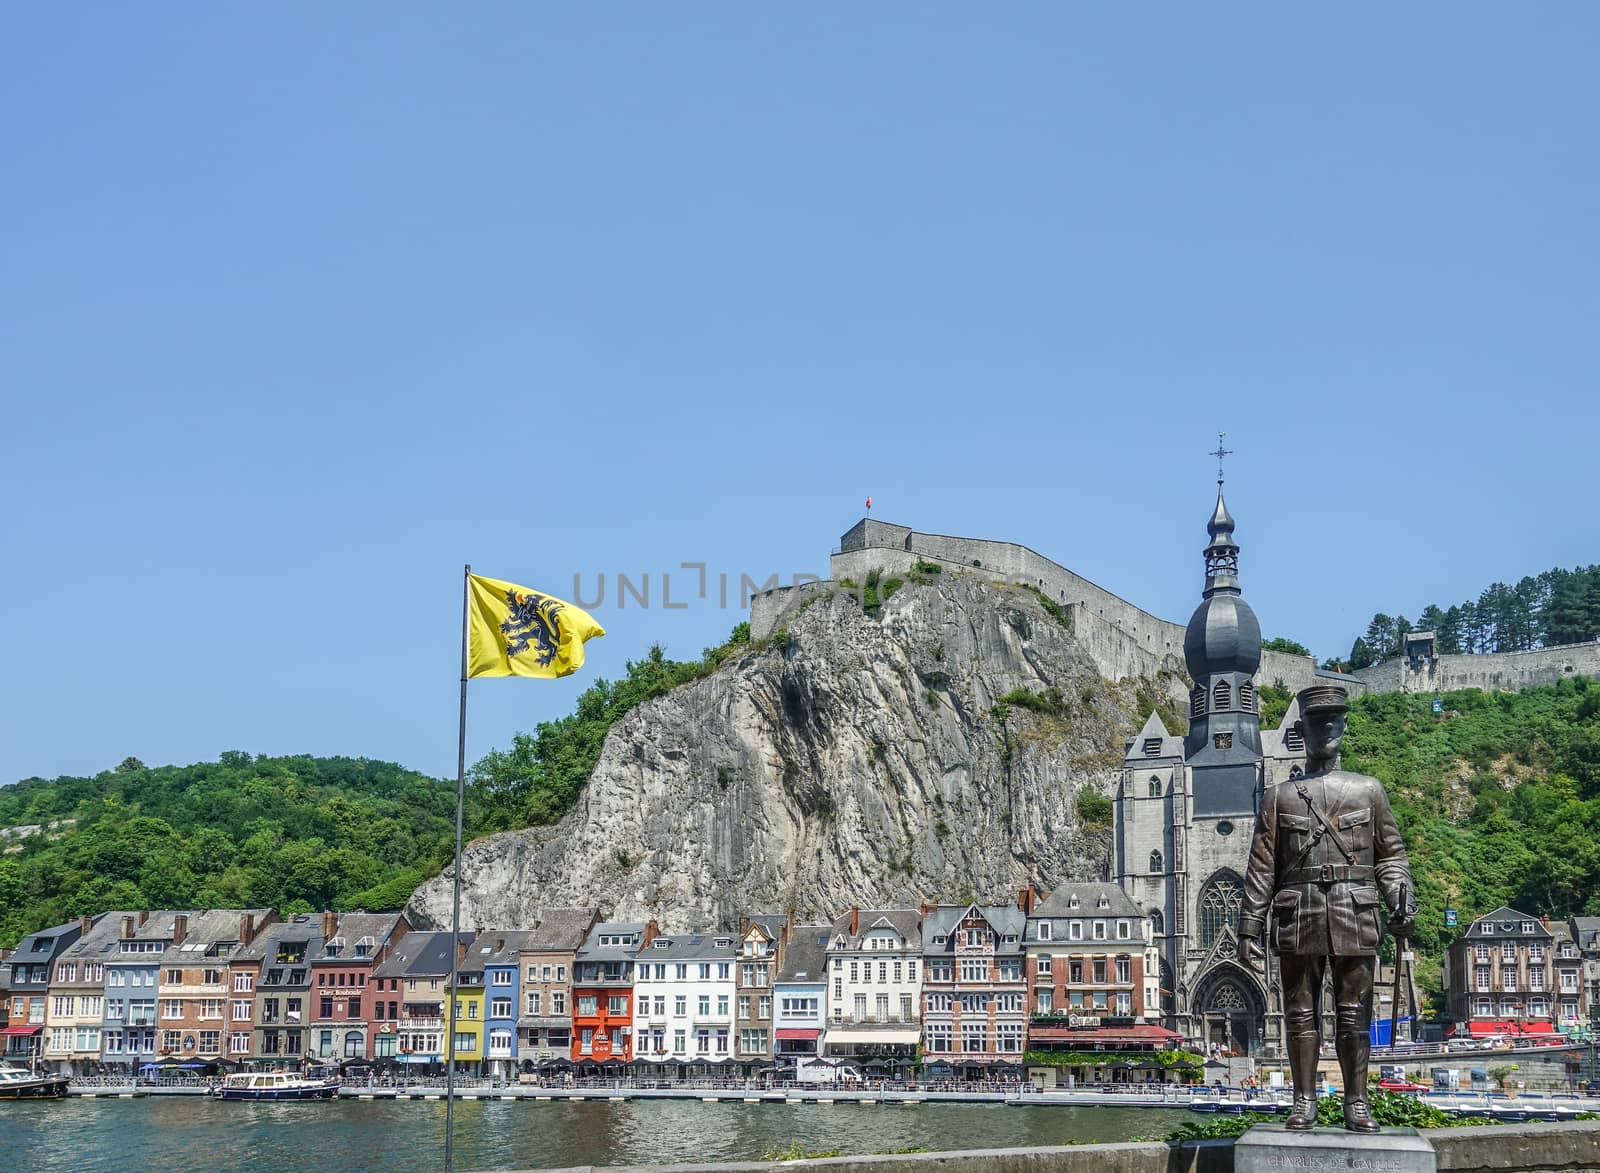 Notre Dame Church, Citadelle and Charles de Gaulle statue in Din by Claudine